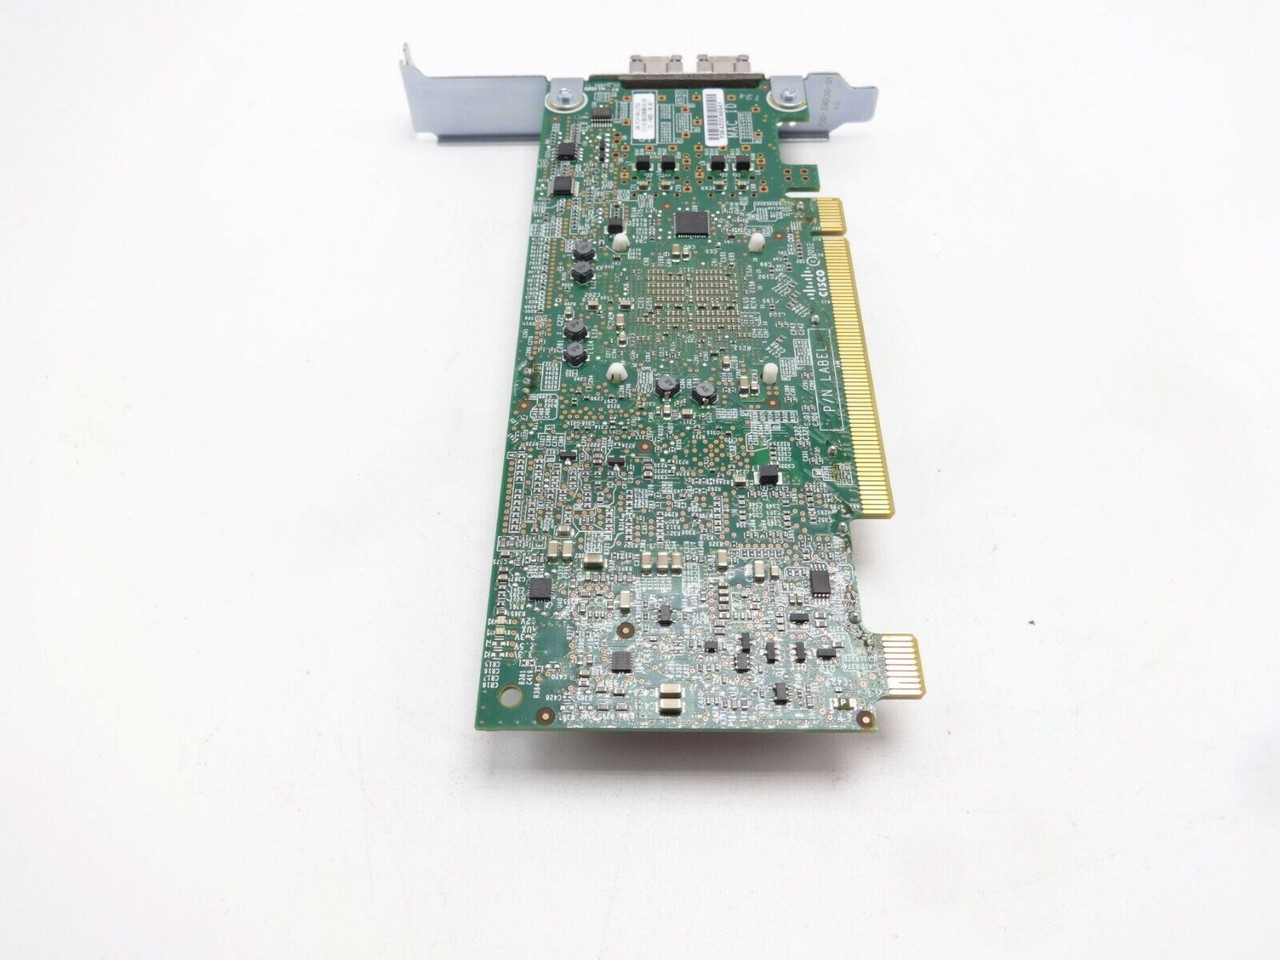 Cisco UCSC-PCIE-CSC-02 10GB Dual Port PCIe Network Adapter Card